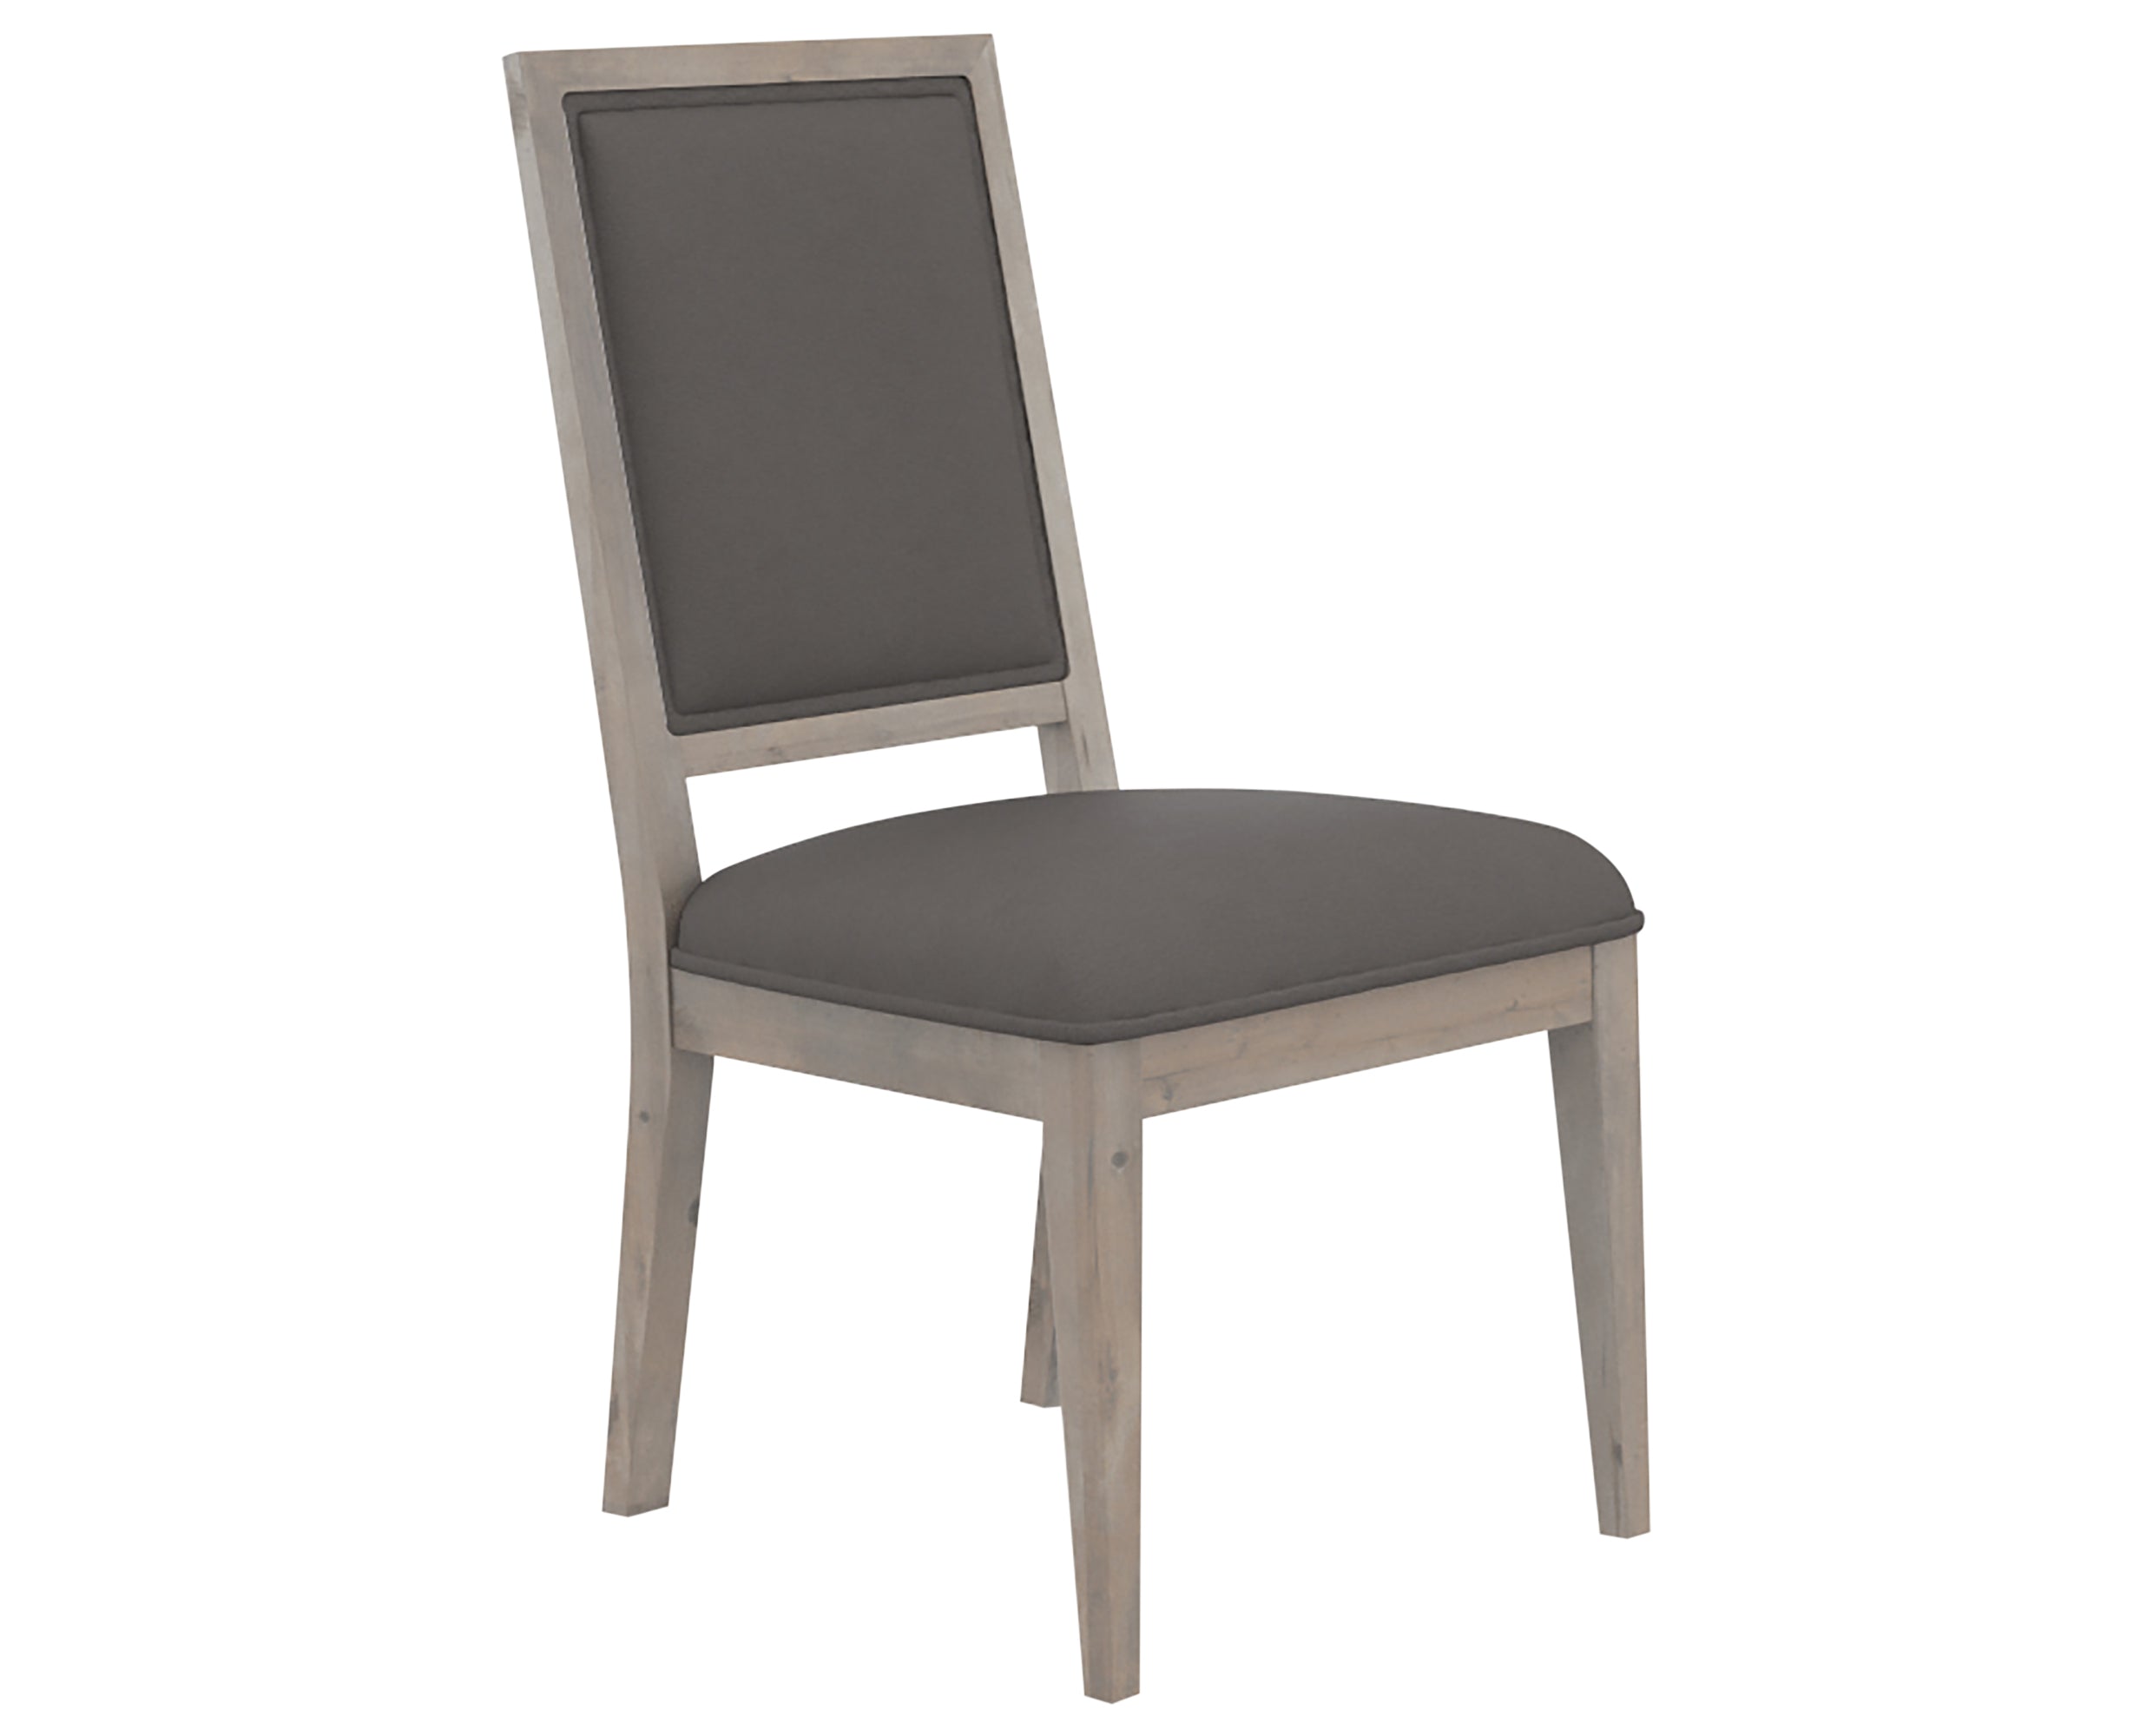 Shadow & Faux Leather XU | Canadel Loft Dining Chair 312 | Valley Ridge Furniture